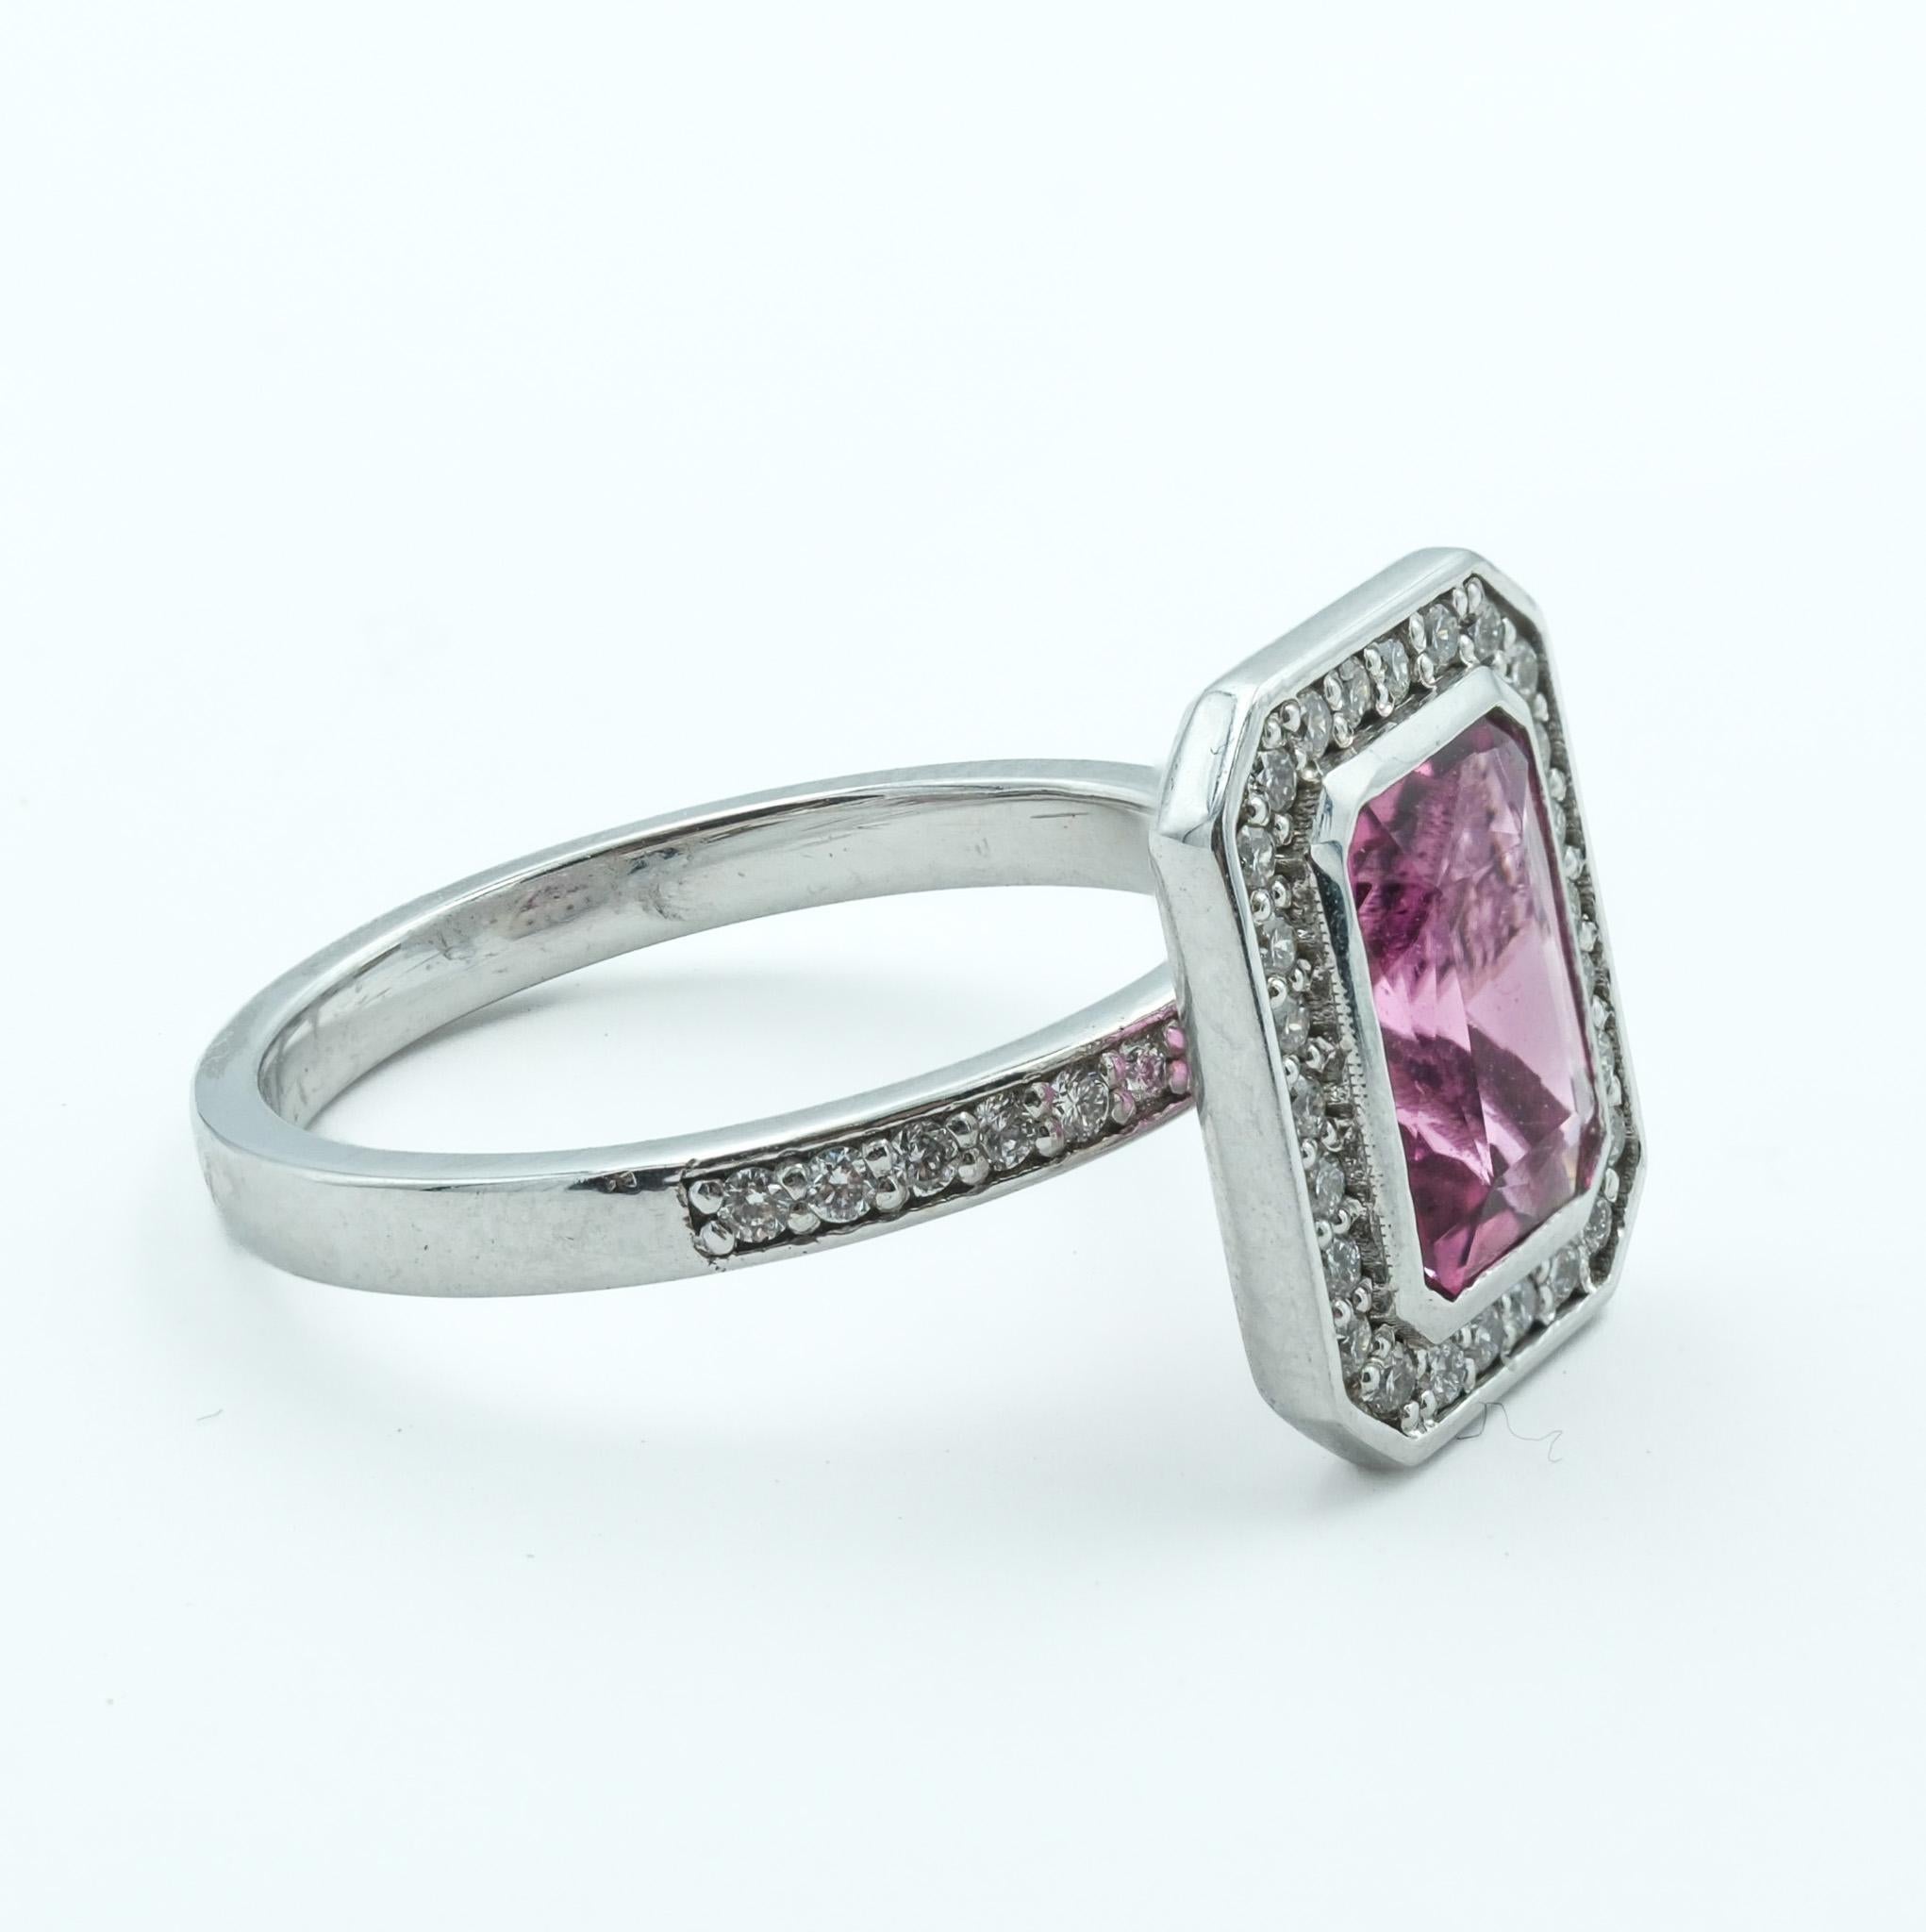 14 Karat White Gold Bezel Set Tourmaline and Diamond Ring In Good Condition For Sale In Fairfield, CT